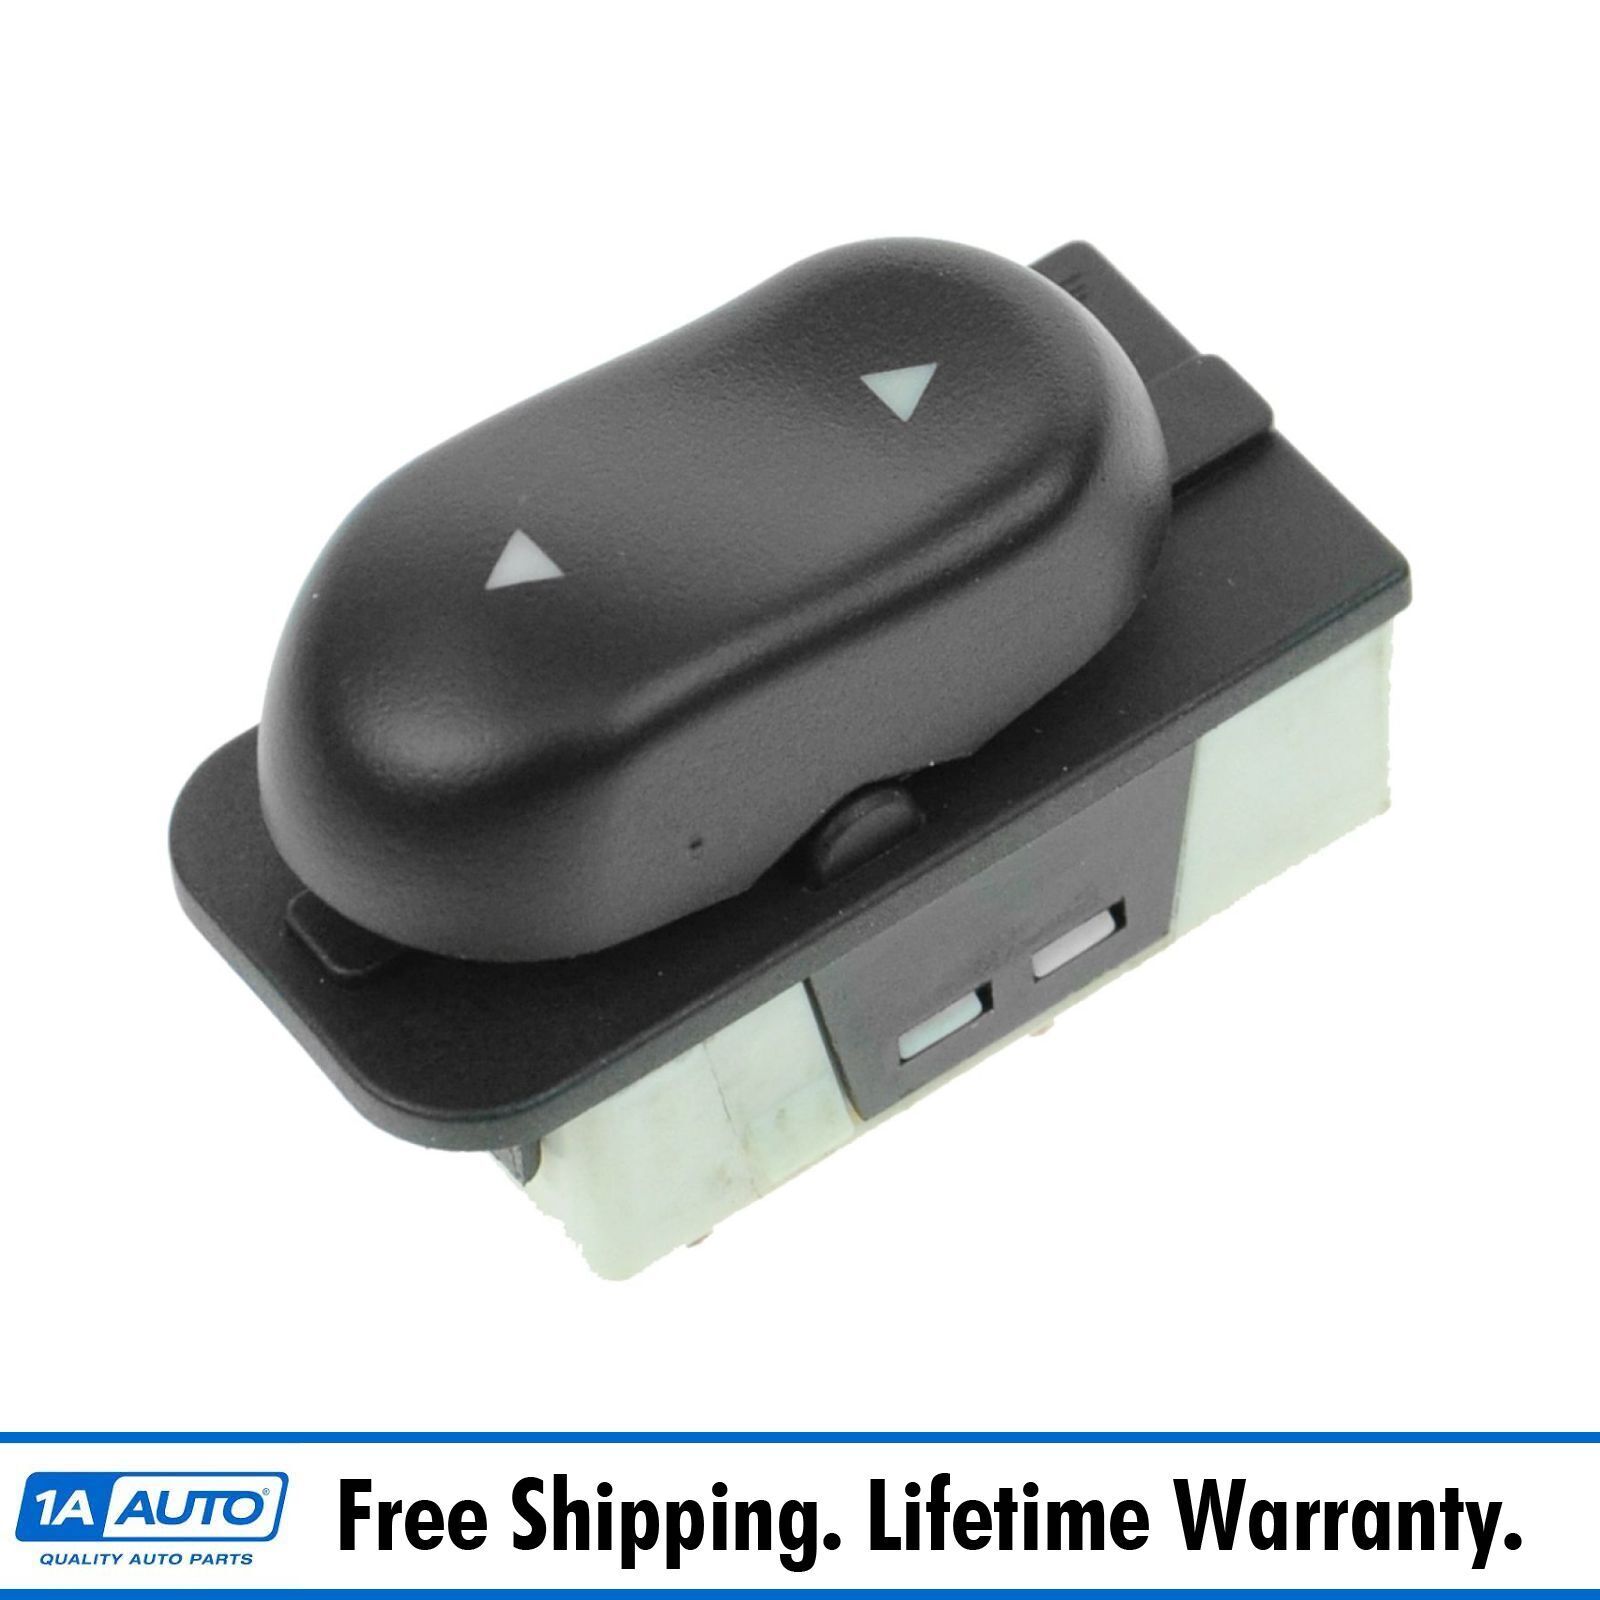 Power Window Switch for Ford Crown Victoria Taurus Mercury Grand Marquis Sable